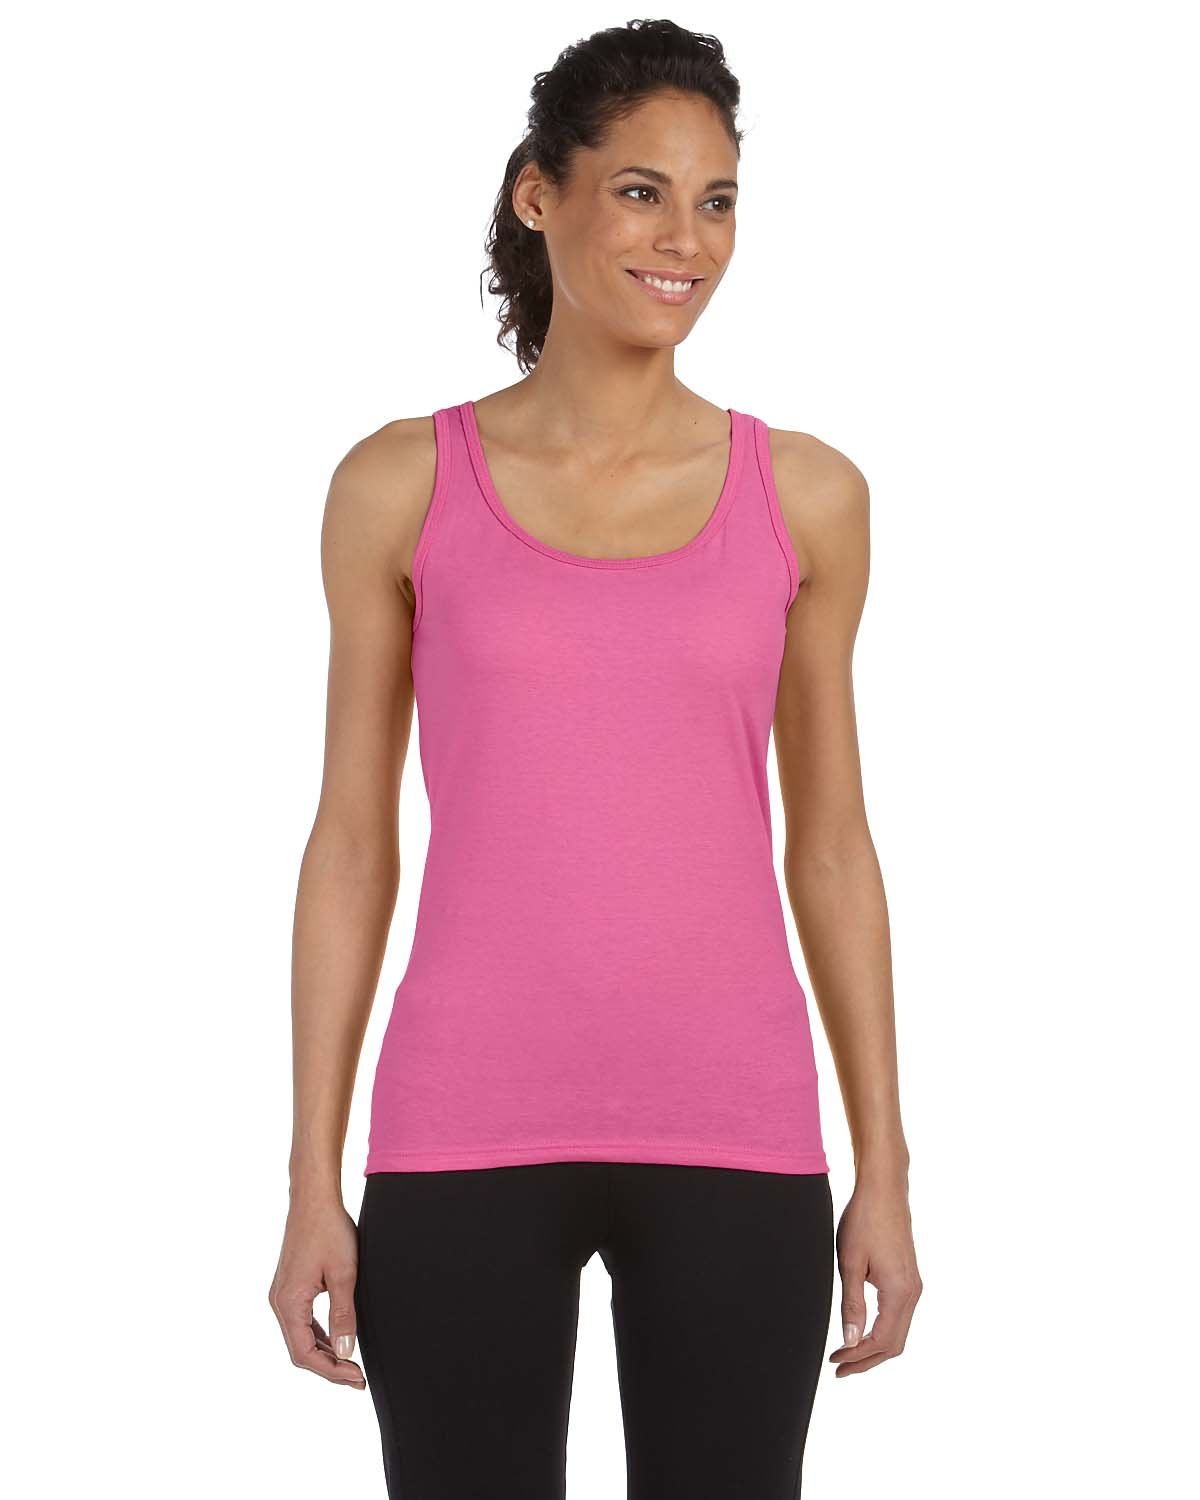 Gildan G642L Ladies' Softstyle Fitted Tank - Comfortable and Stylish